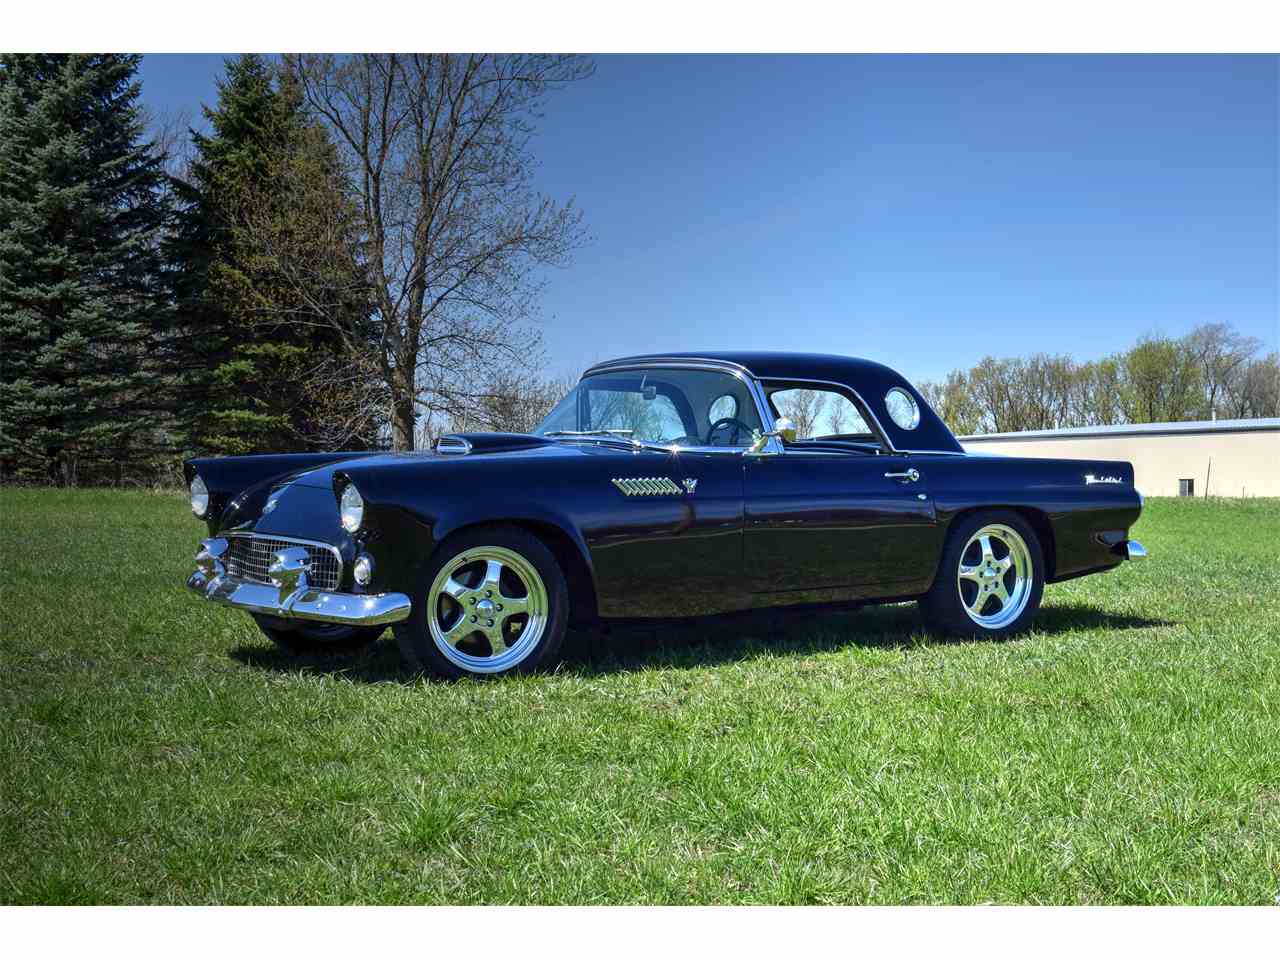 1955 Ford Race Car For Sale Classiccars Cc 978661 within The Most Incredible classic cars watertown mn for Your favorite car reference